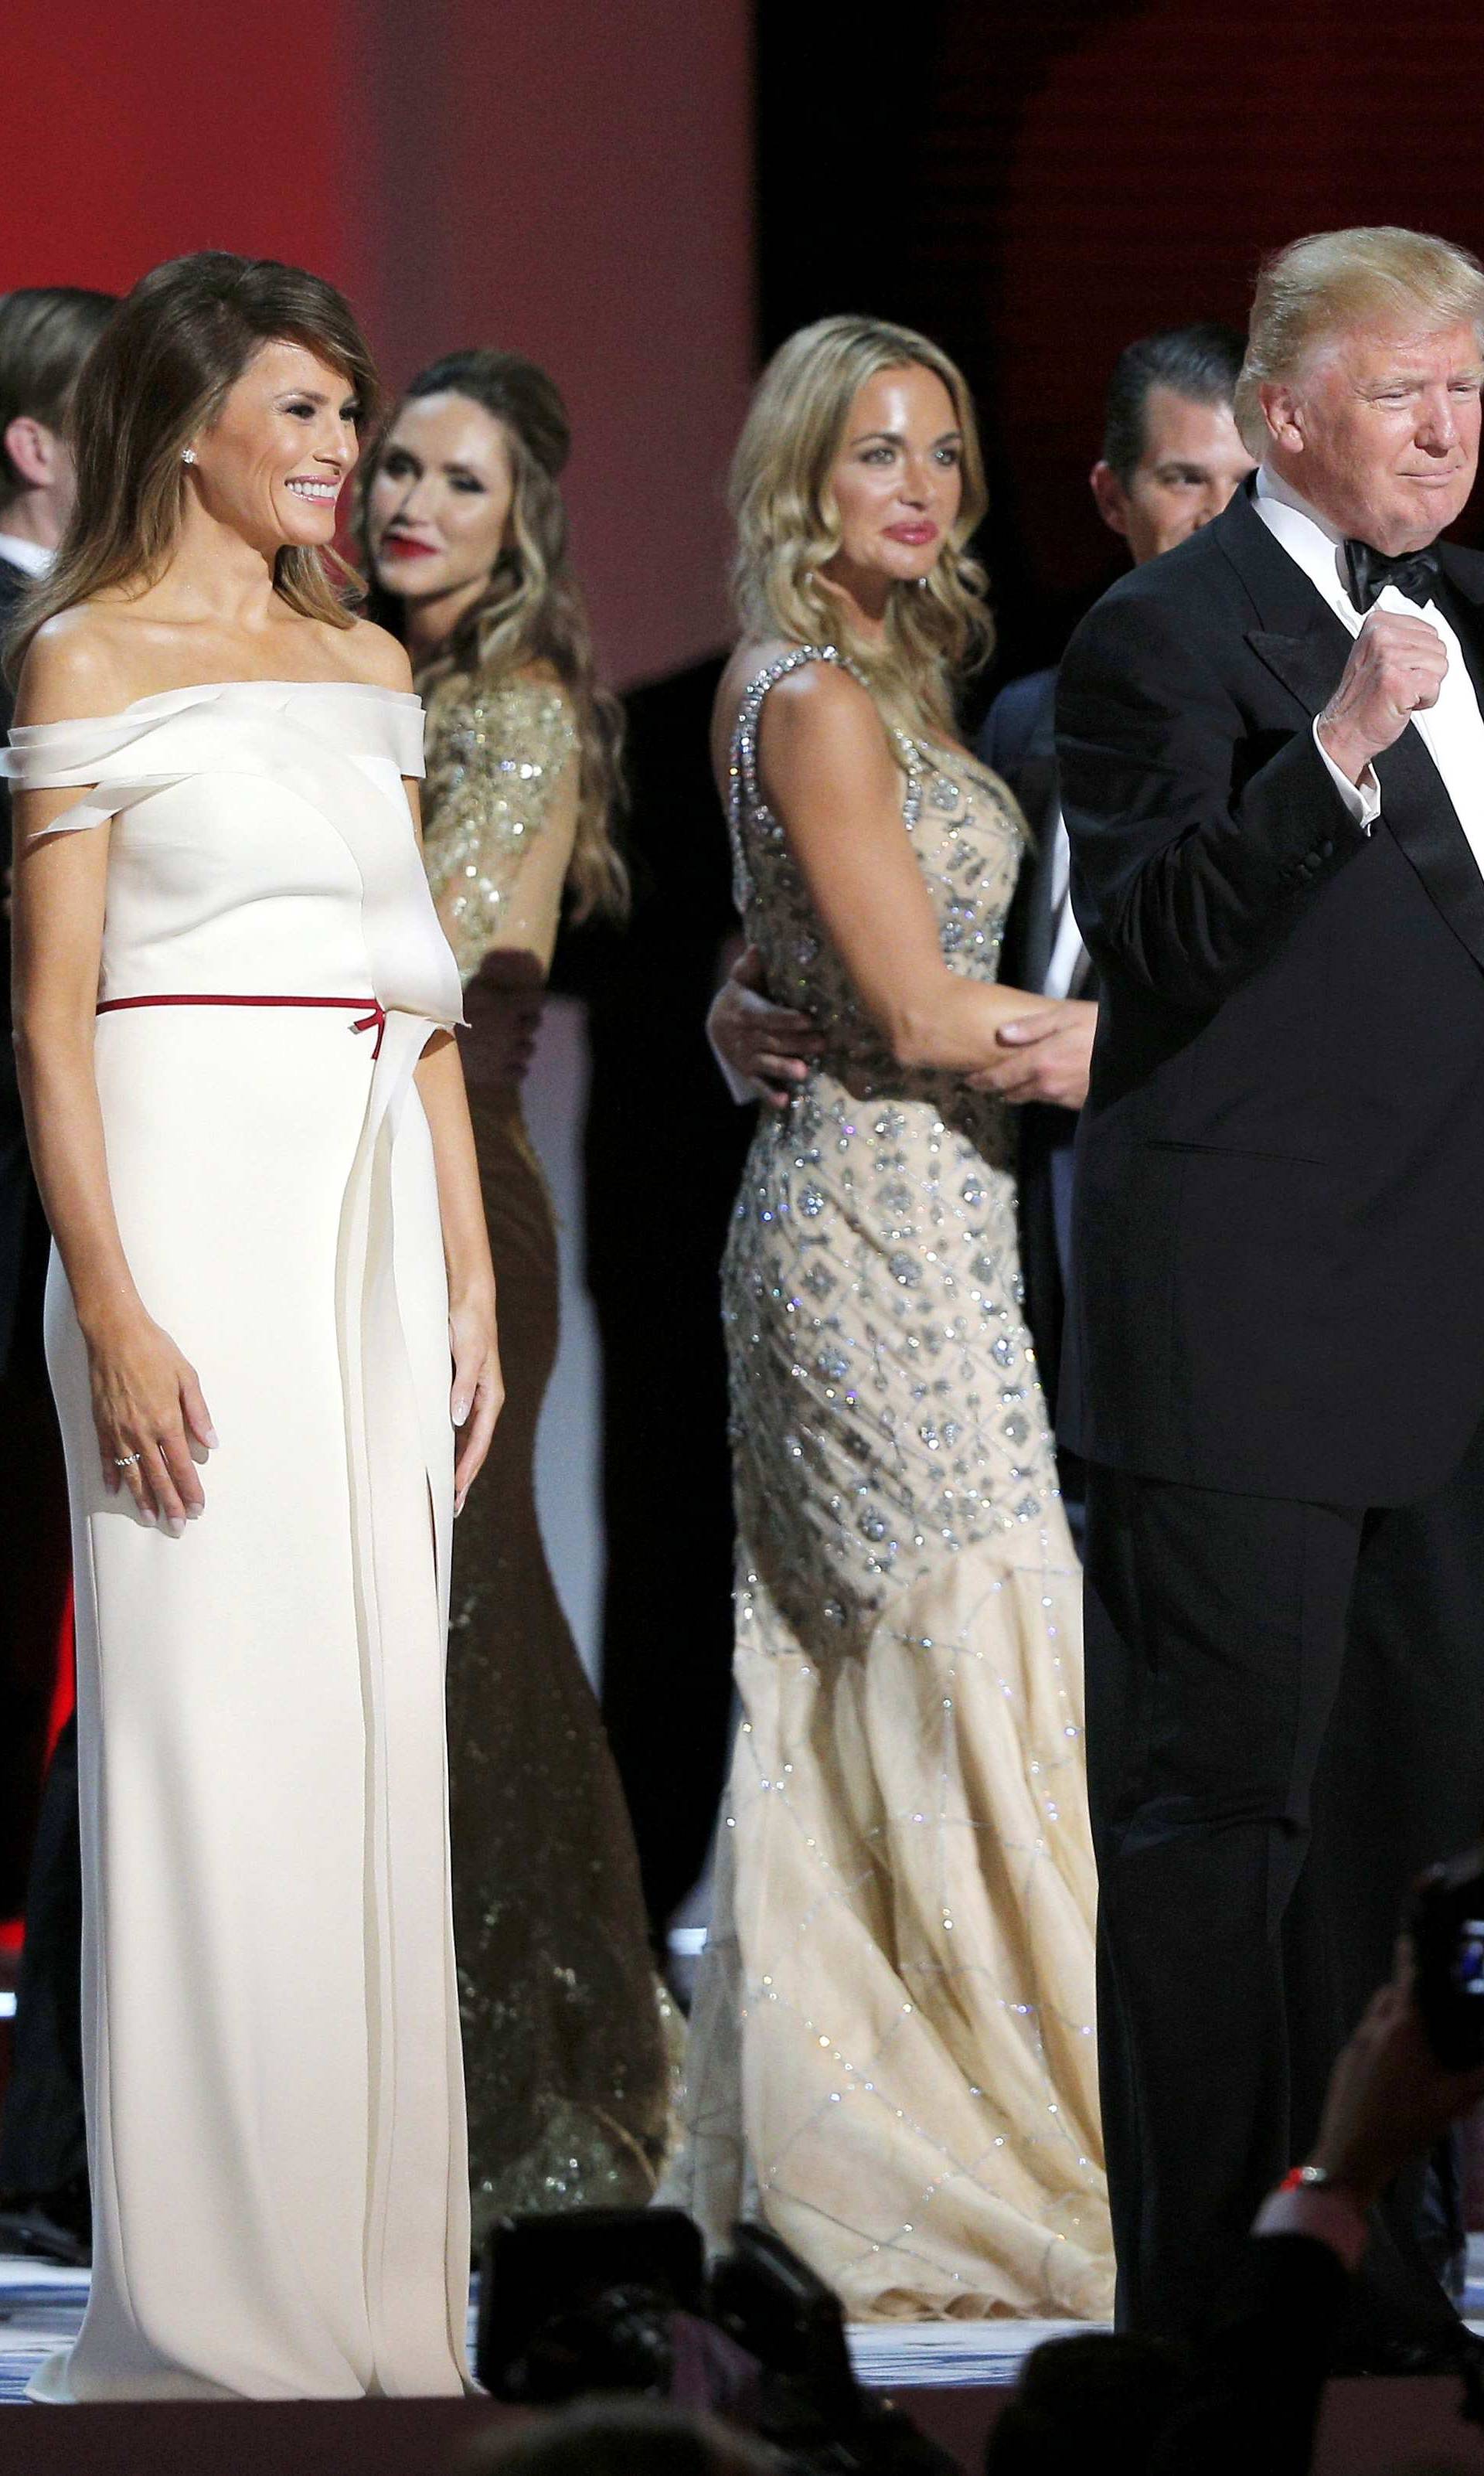 U.S. President Trump pumps his fists with wife Melania and members of their family after dancing their first dance to Frank Sinatra's song "My Way" at his "Liberty" Inaugural Ball in Washington